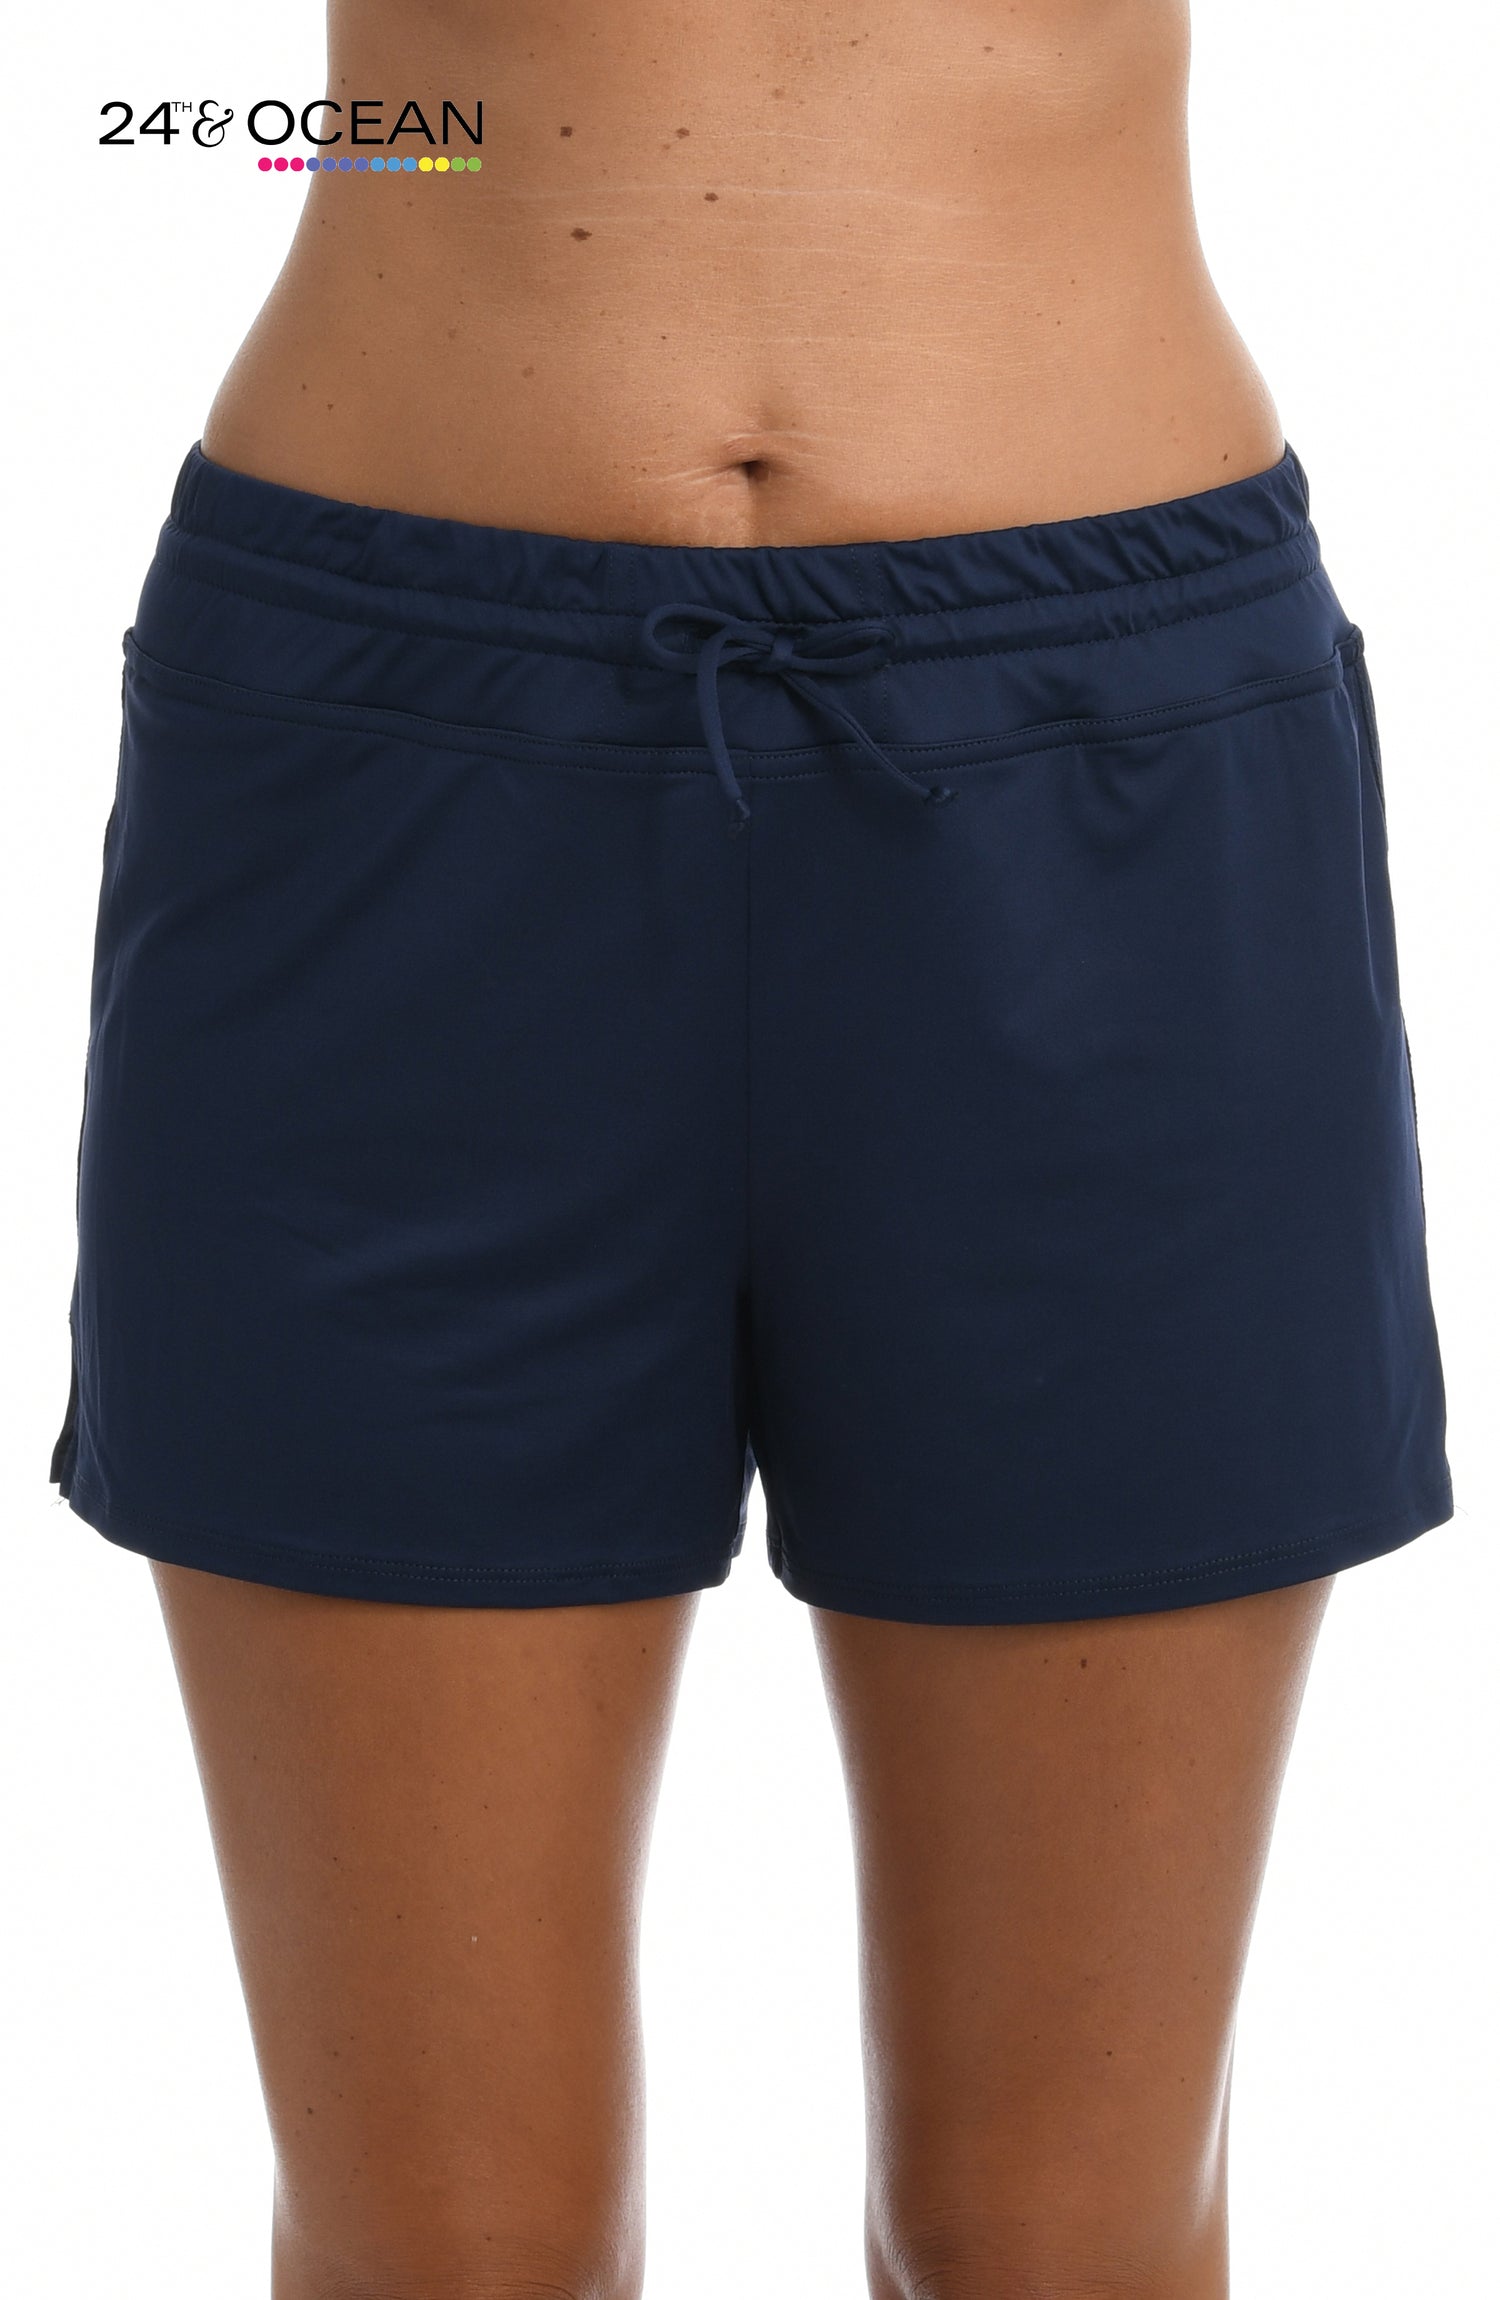 Model is wearing a solid midnight blue colored swim short bottom from our 24th & Ocean brand.